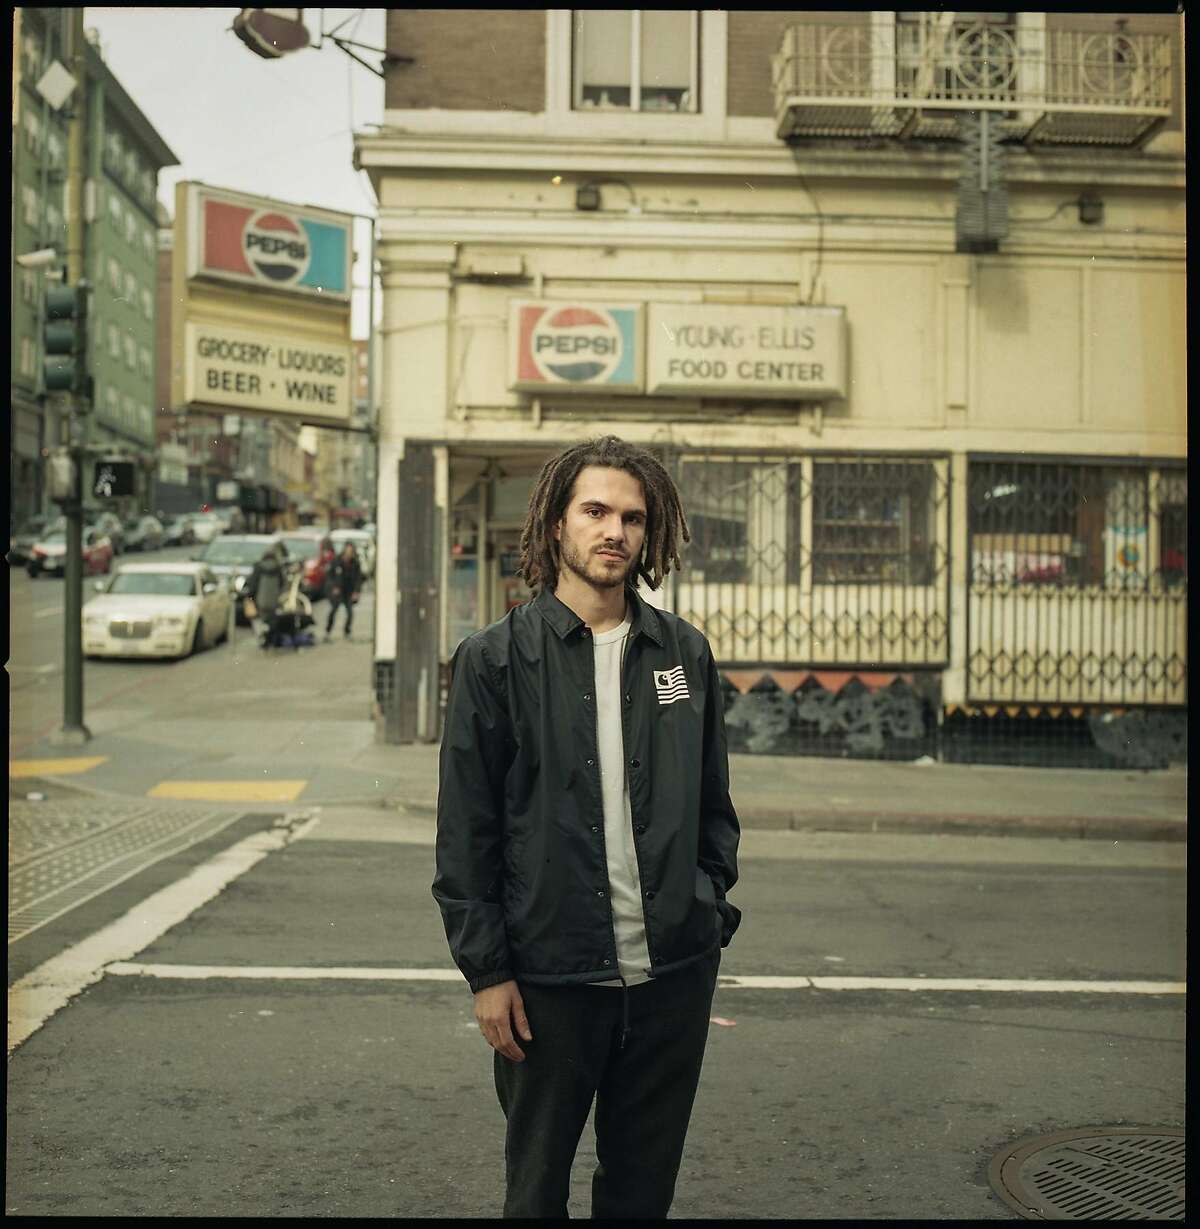 Vincent Fenton, known under the pseudonym FKJ (French Kiwi Juice), will perform at The Warfield in San Francisco on April 14, 2017 in advance of his Coachella debut.